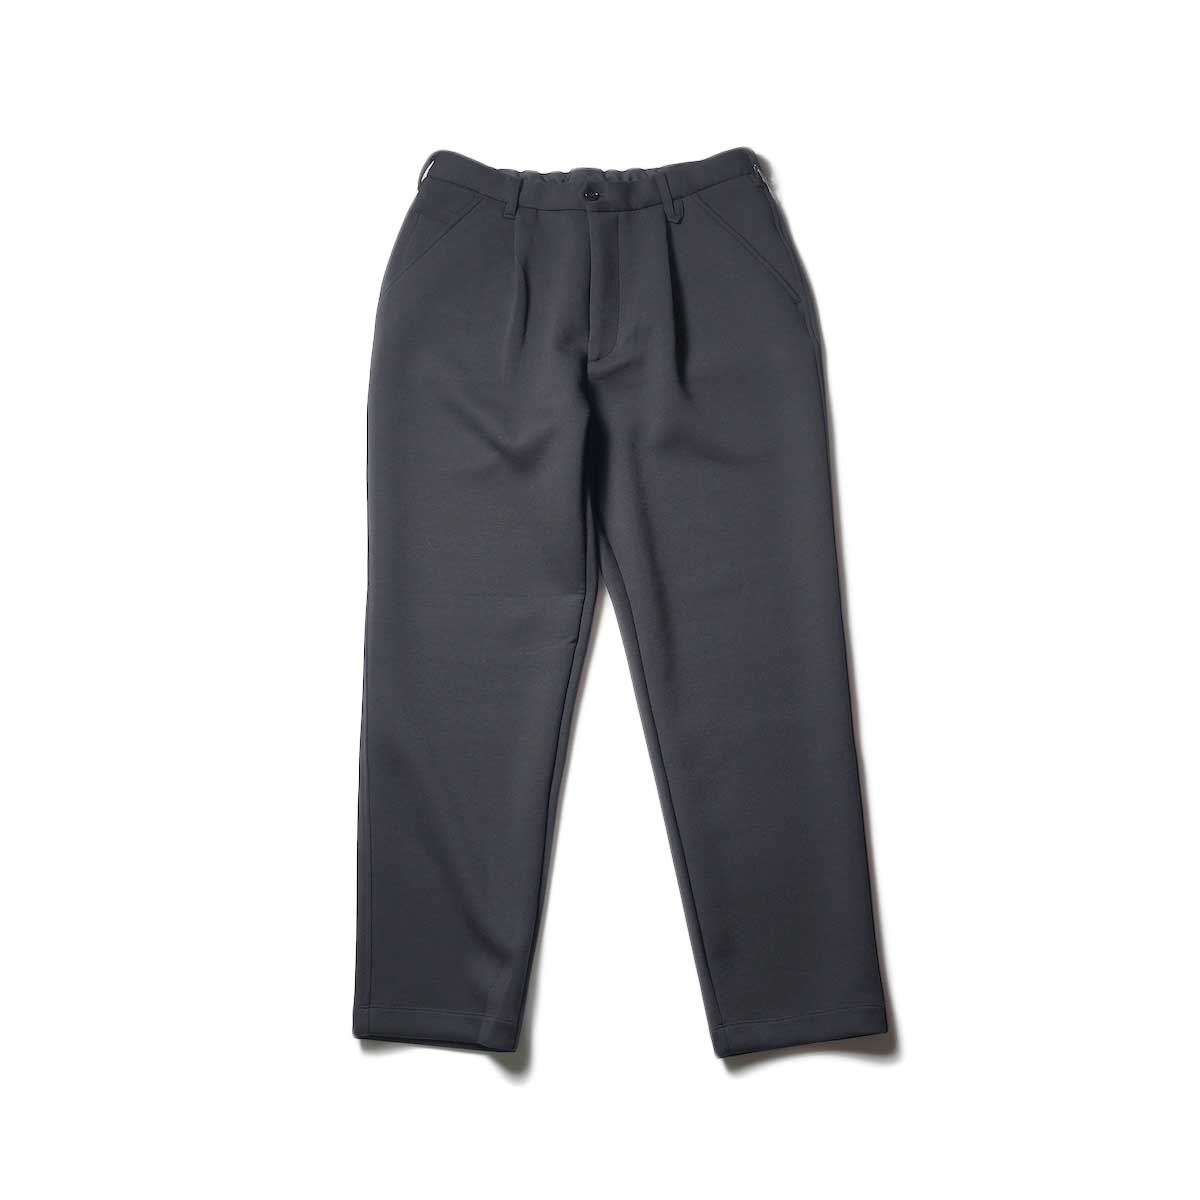 CURLY&amp;Co. / AIR CUSHION PANTS solid / (Black)